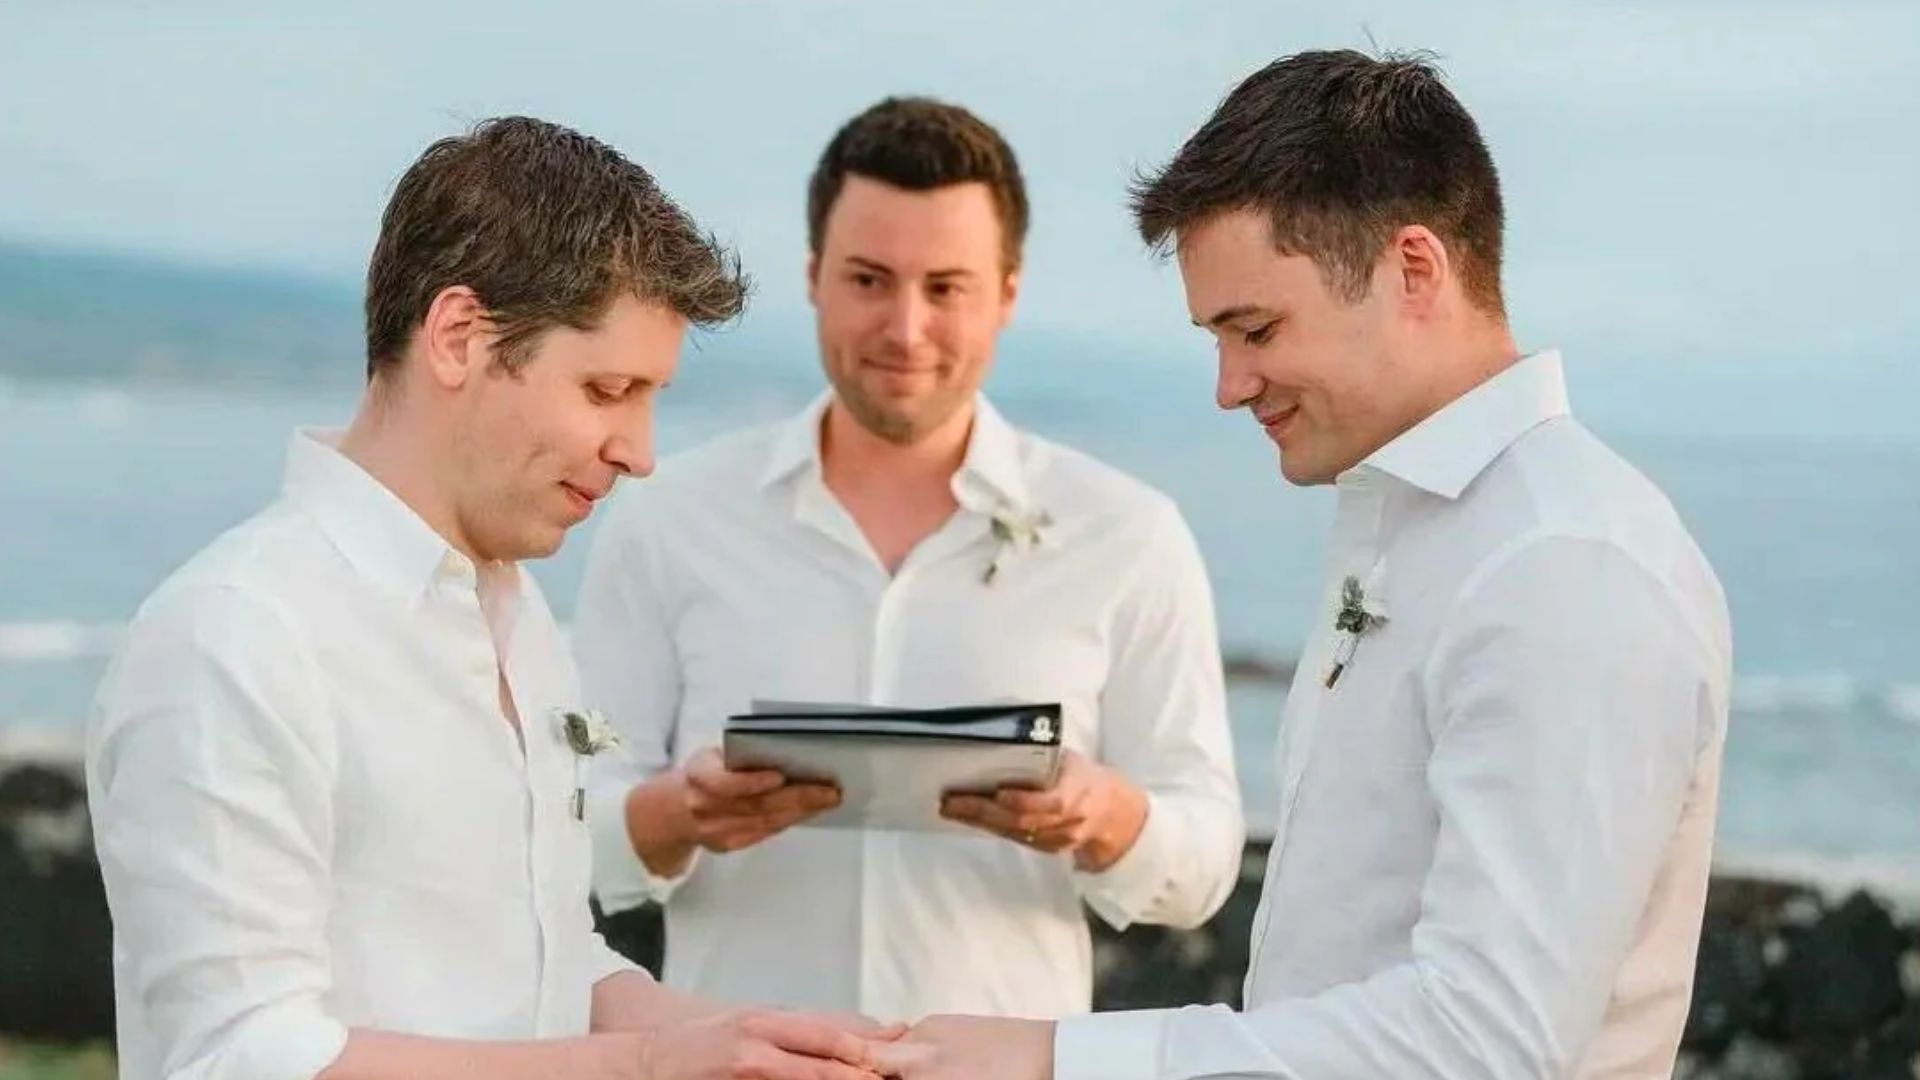 OpenAI CEO Sam Altman Ties the Knot with Long-Time Boyfriend Oliver Mulherin